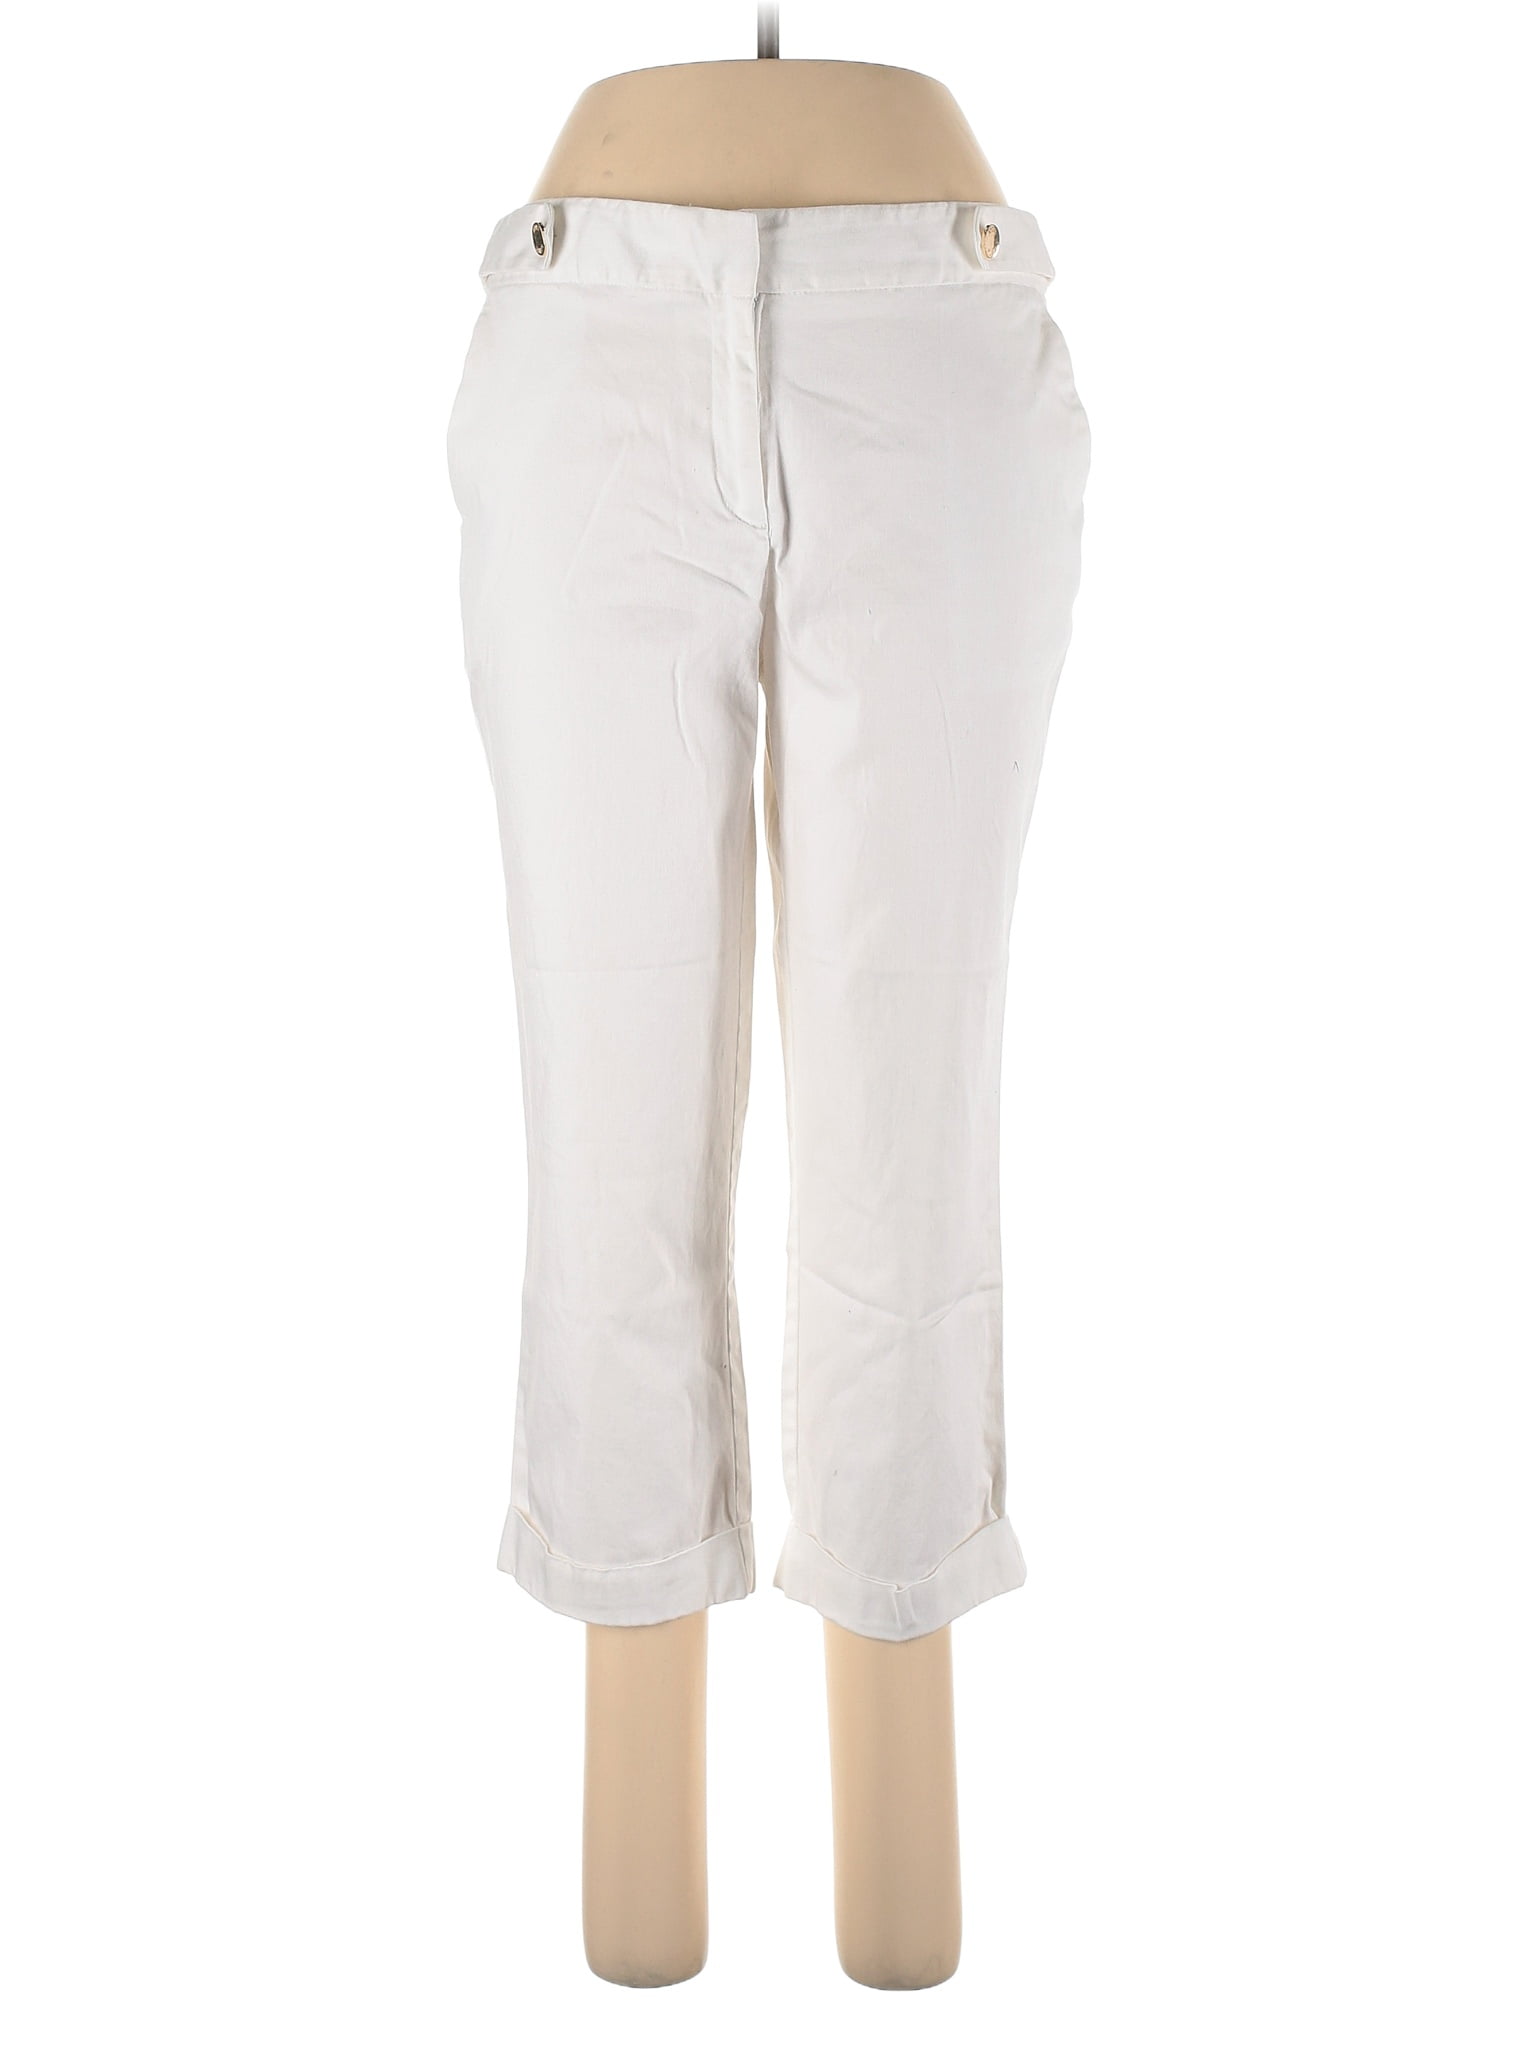 Anne Klein White Casual Pants Size 10 - 89% off | ThredUp